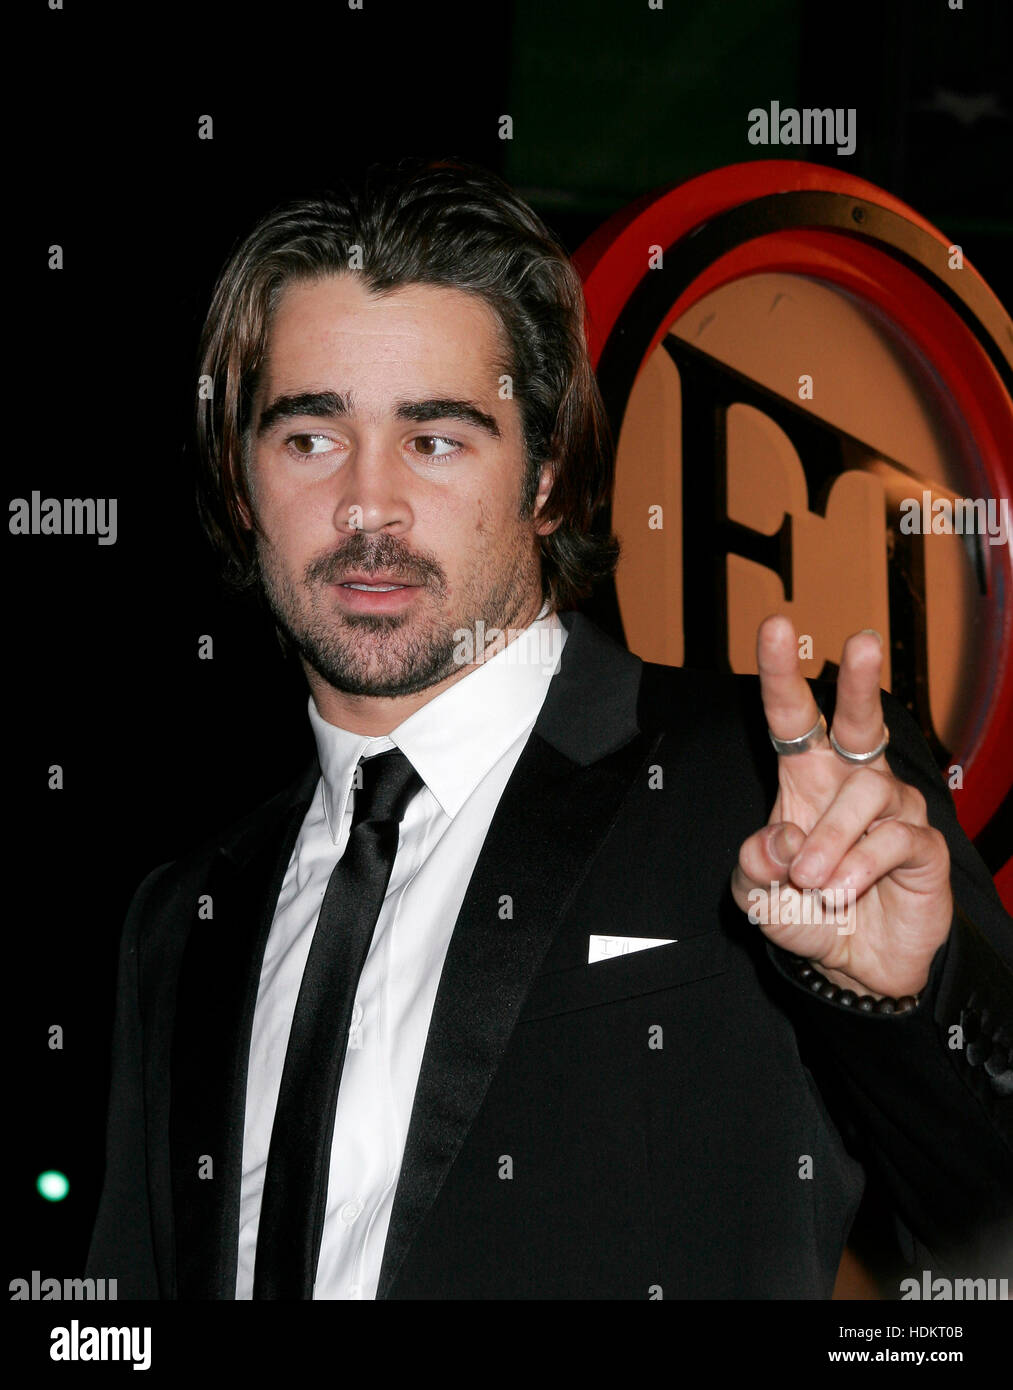 Colin Farrell at the premiere of the film, 'Alexander'' at Grauman's Chinese Theatre on November 16, 2004 in Los Angeles. Photo credit: Francis Specker Stock Photo